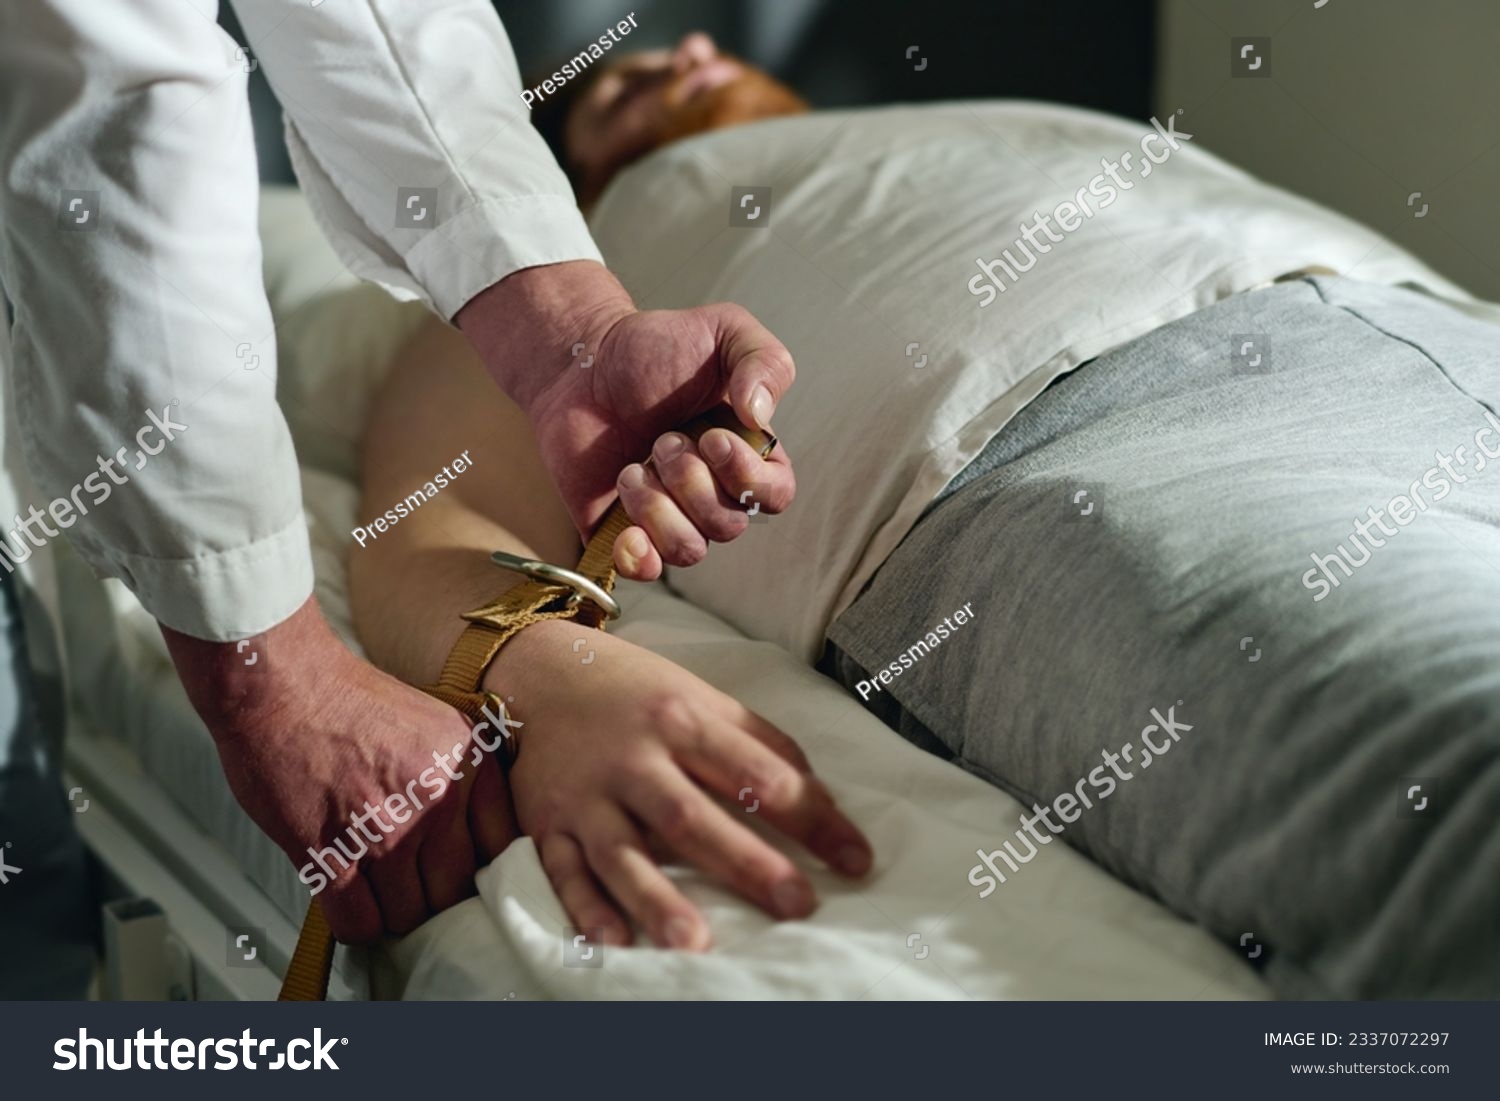 Hands of male doctor of mental hospital binding patient with belts to bed while bending over him during medical treatment course #2337072297